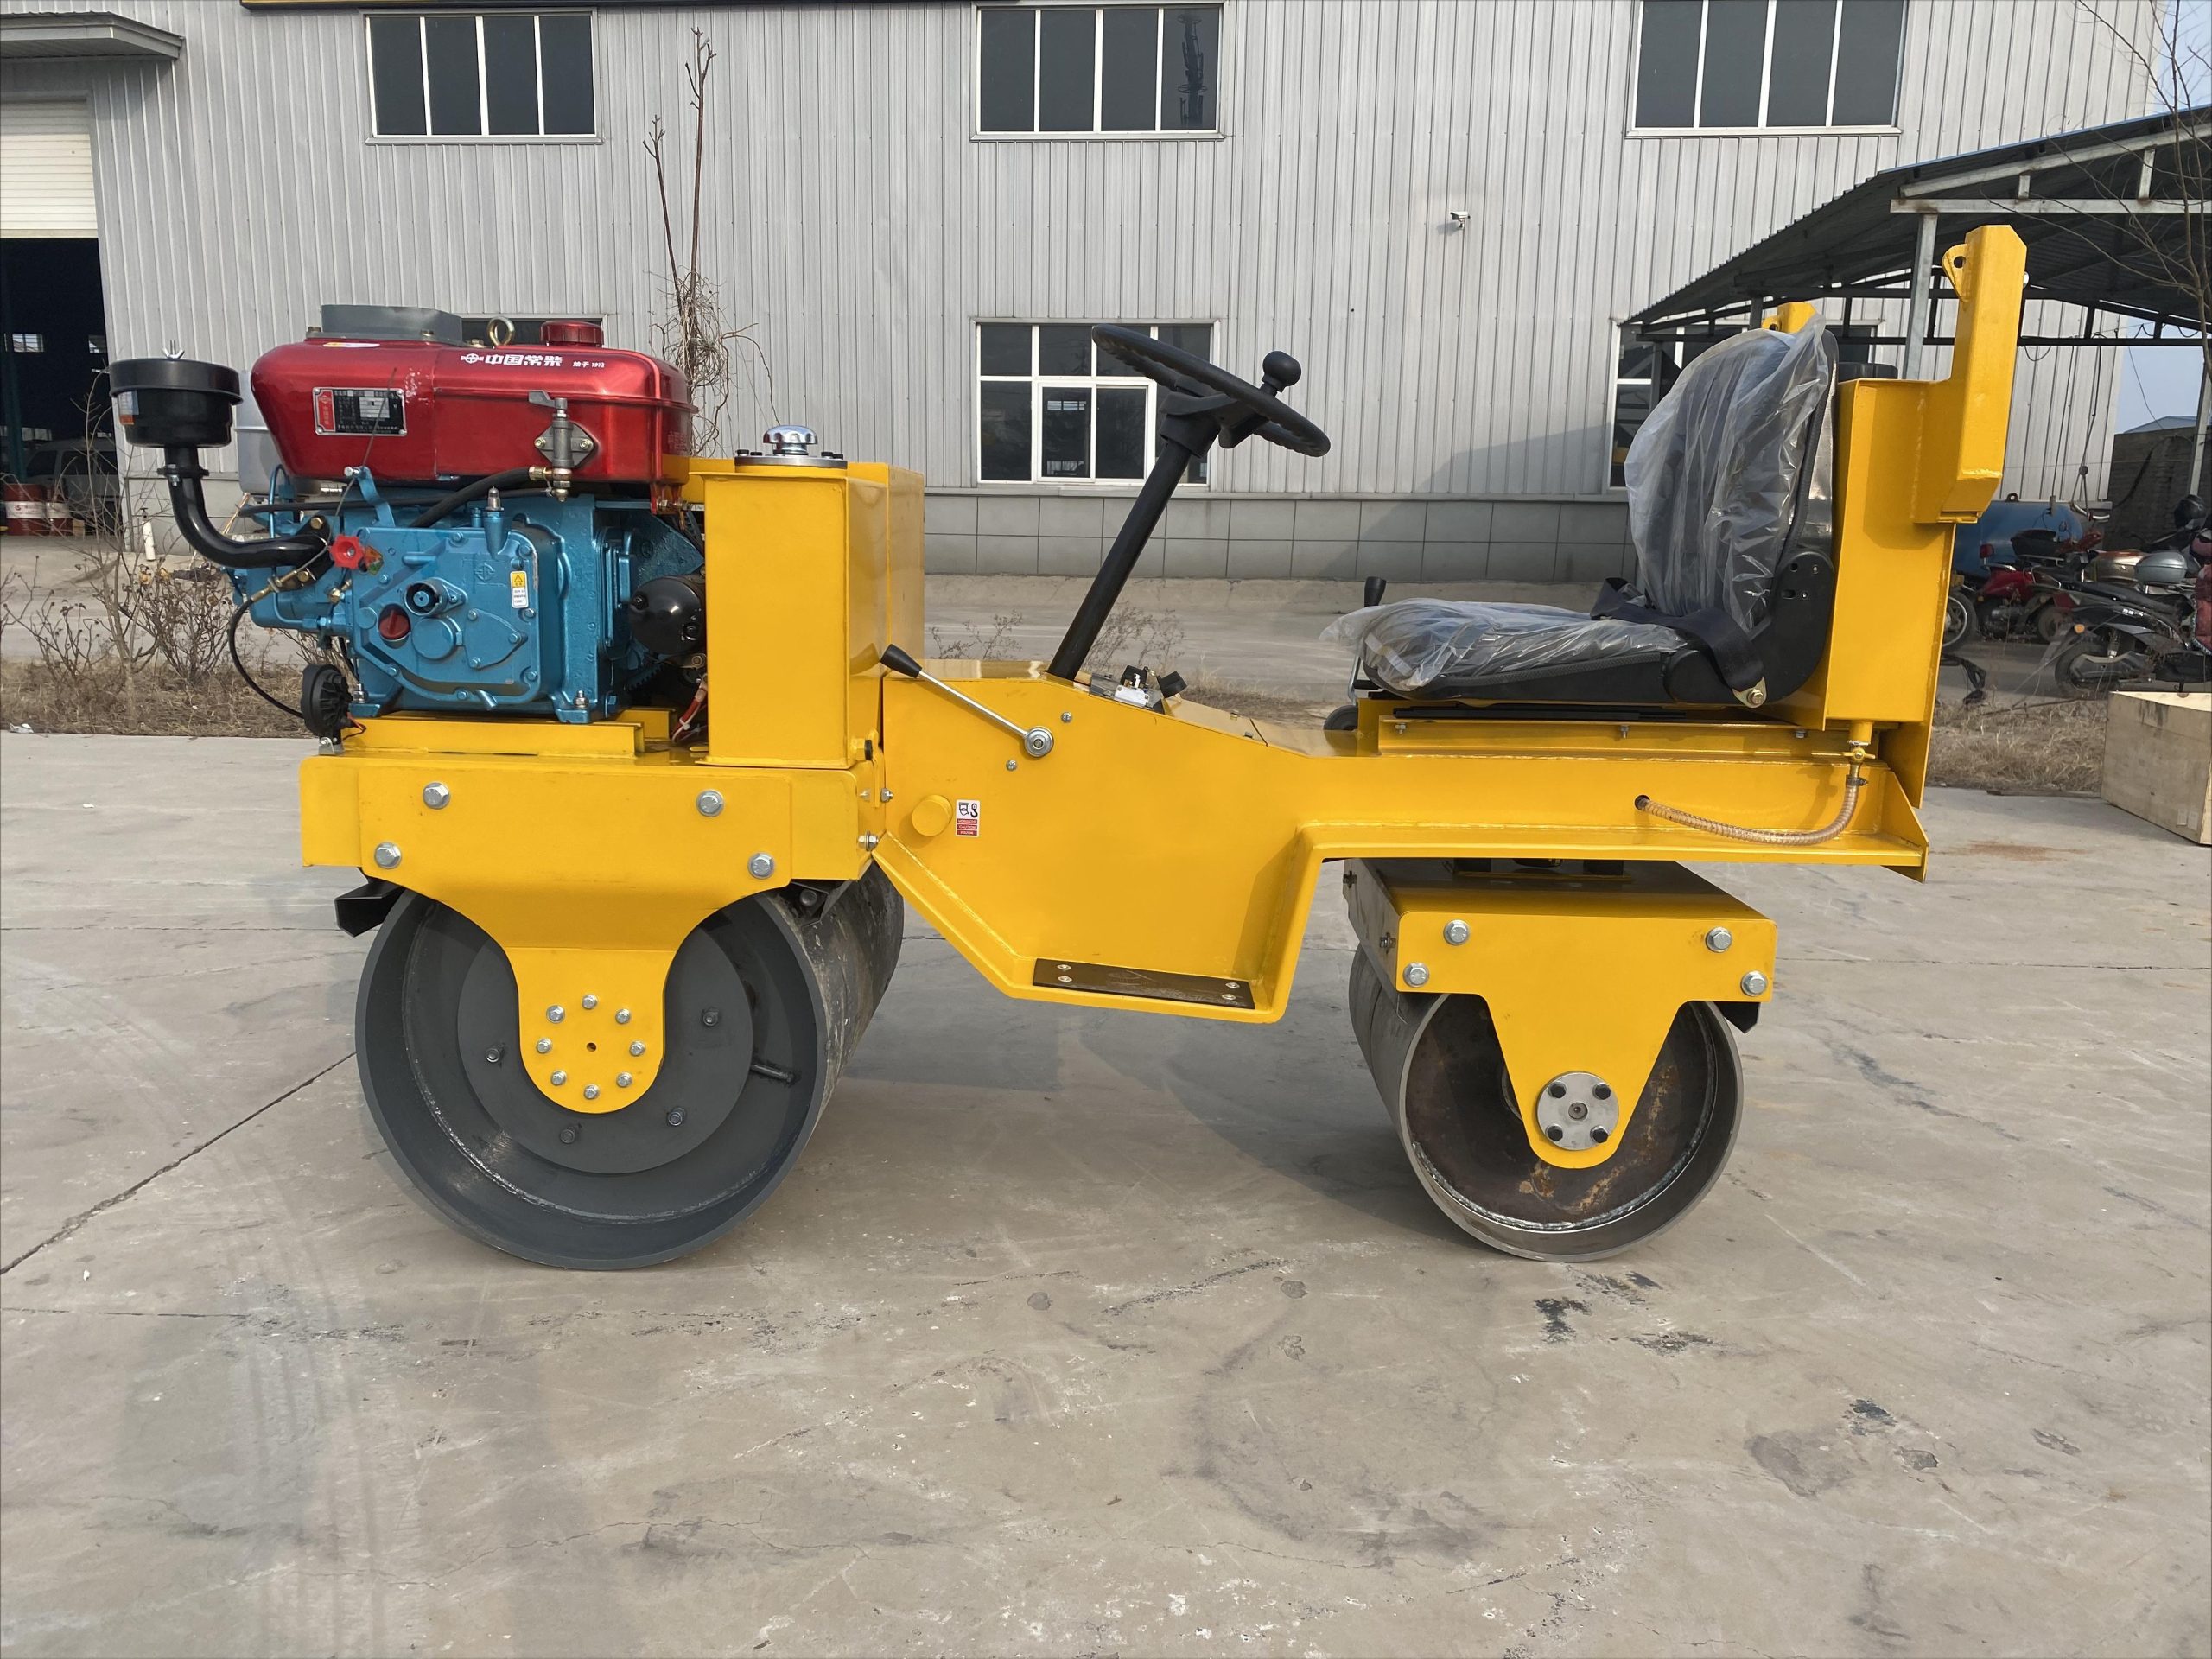 How to deal with the battery problems of the small road roller?